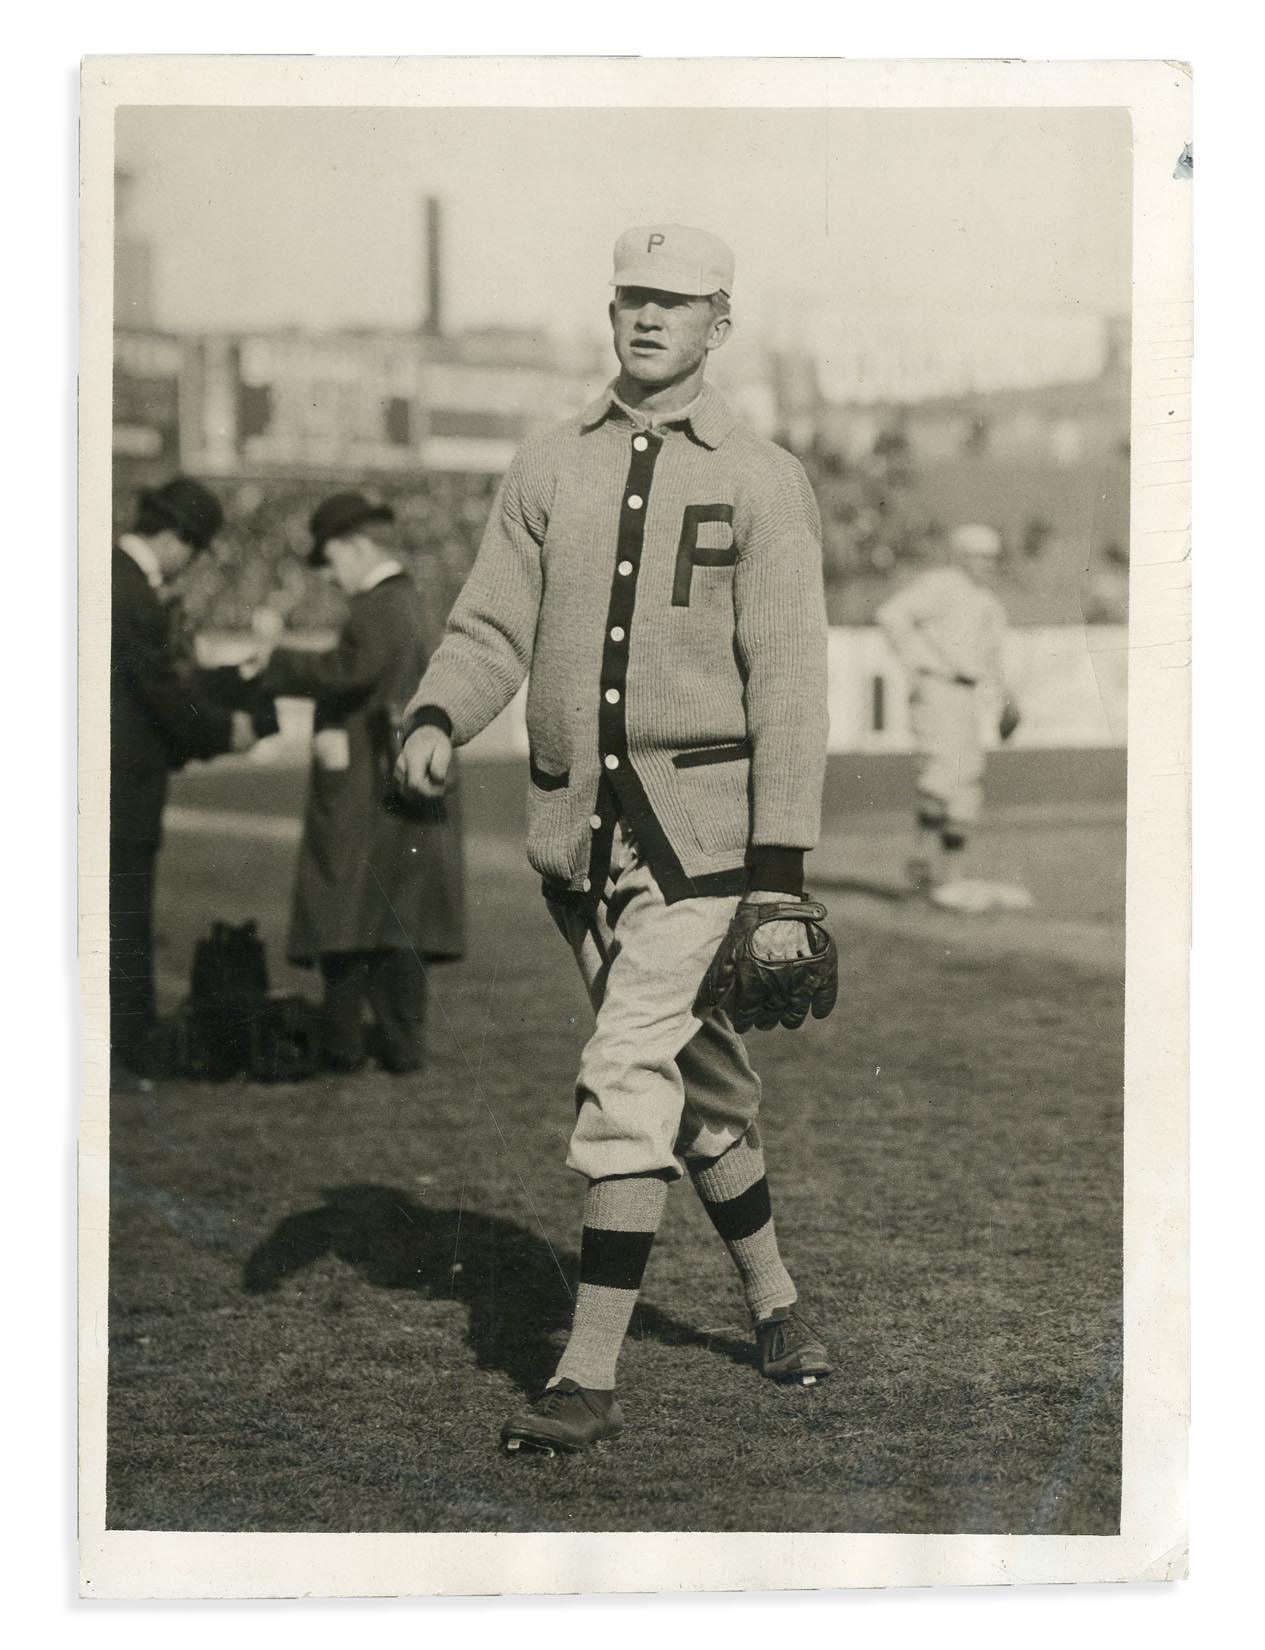 Vintage Sports Photographs - 1911 Grover Cleveland Alexander Rookie Photograph from "The Ring"